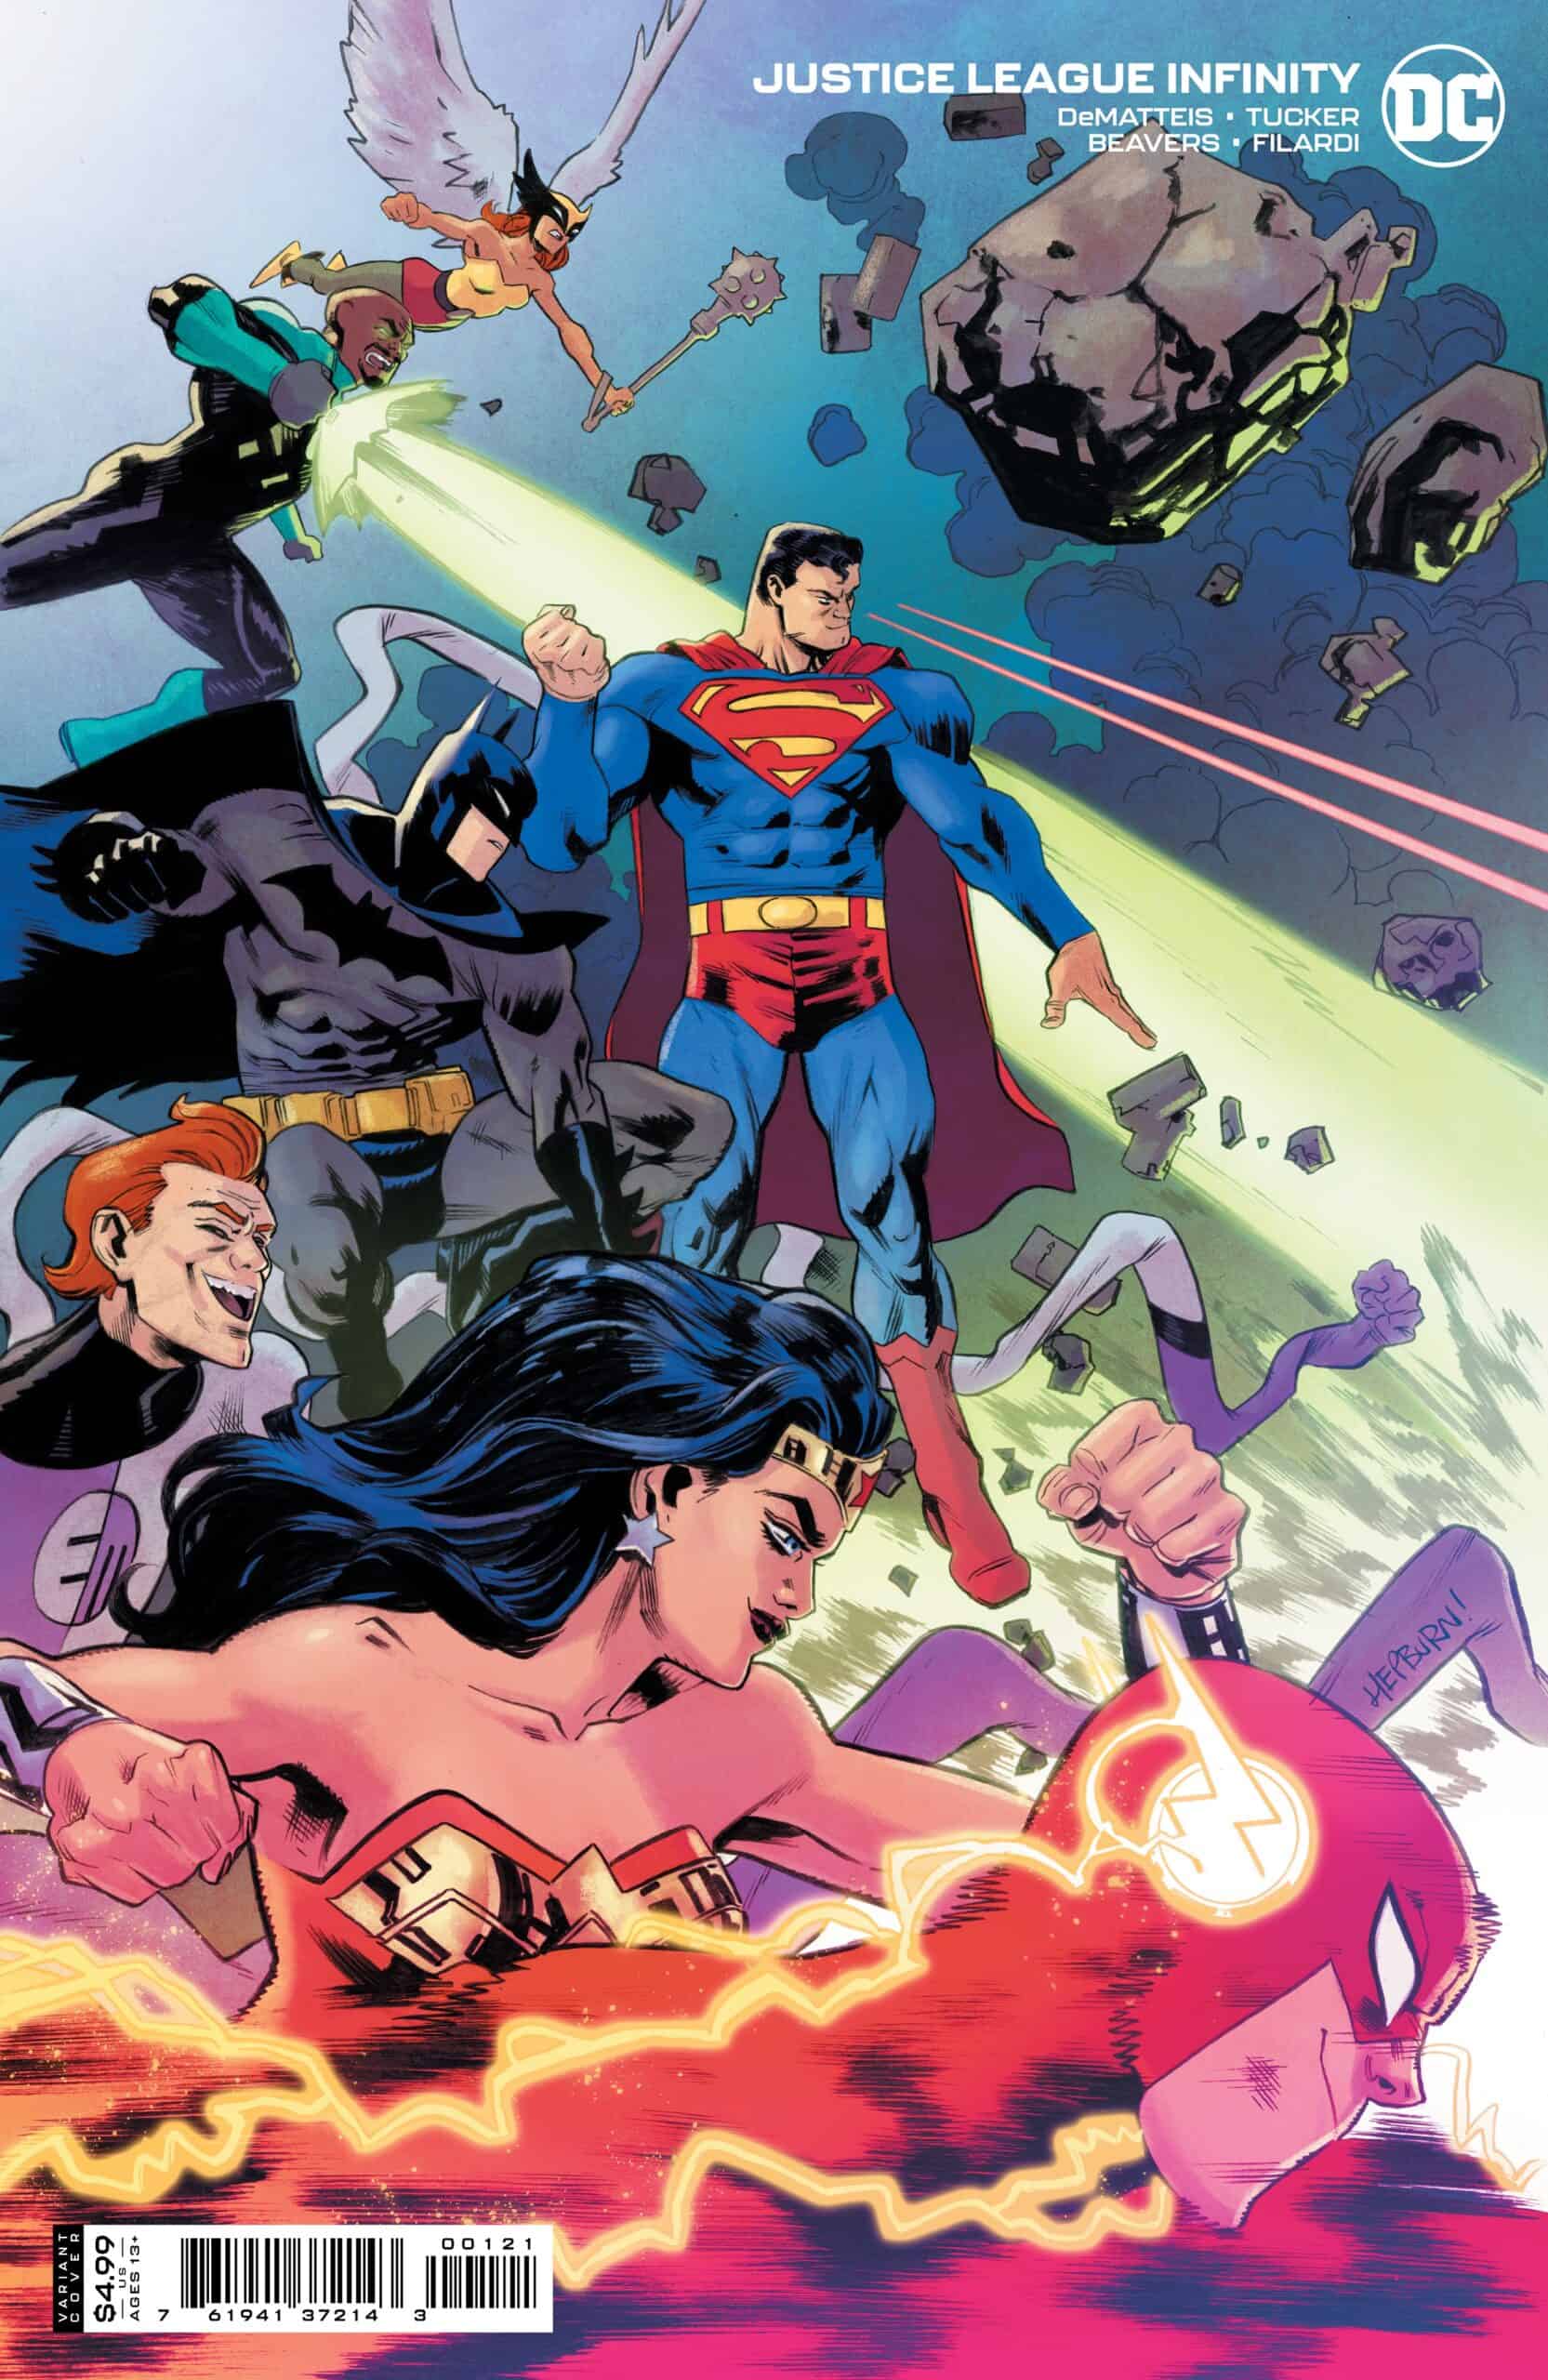 NEWS WATCH: DC Announces Justice League Infinity, A New Limited Series Set  in the World of Justice League Unlimited - Comic Watch